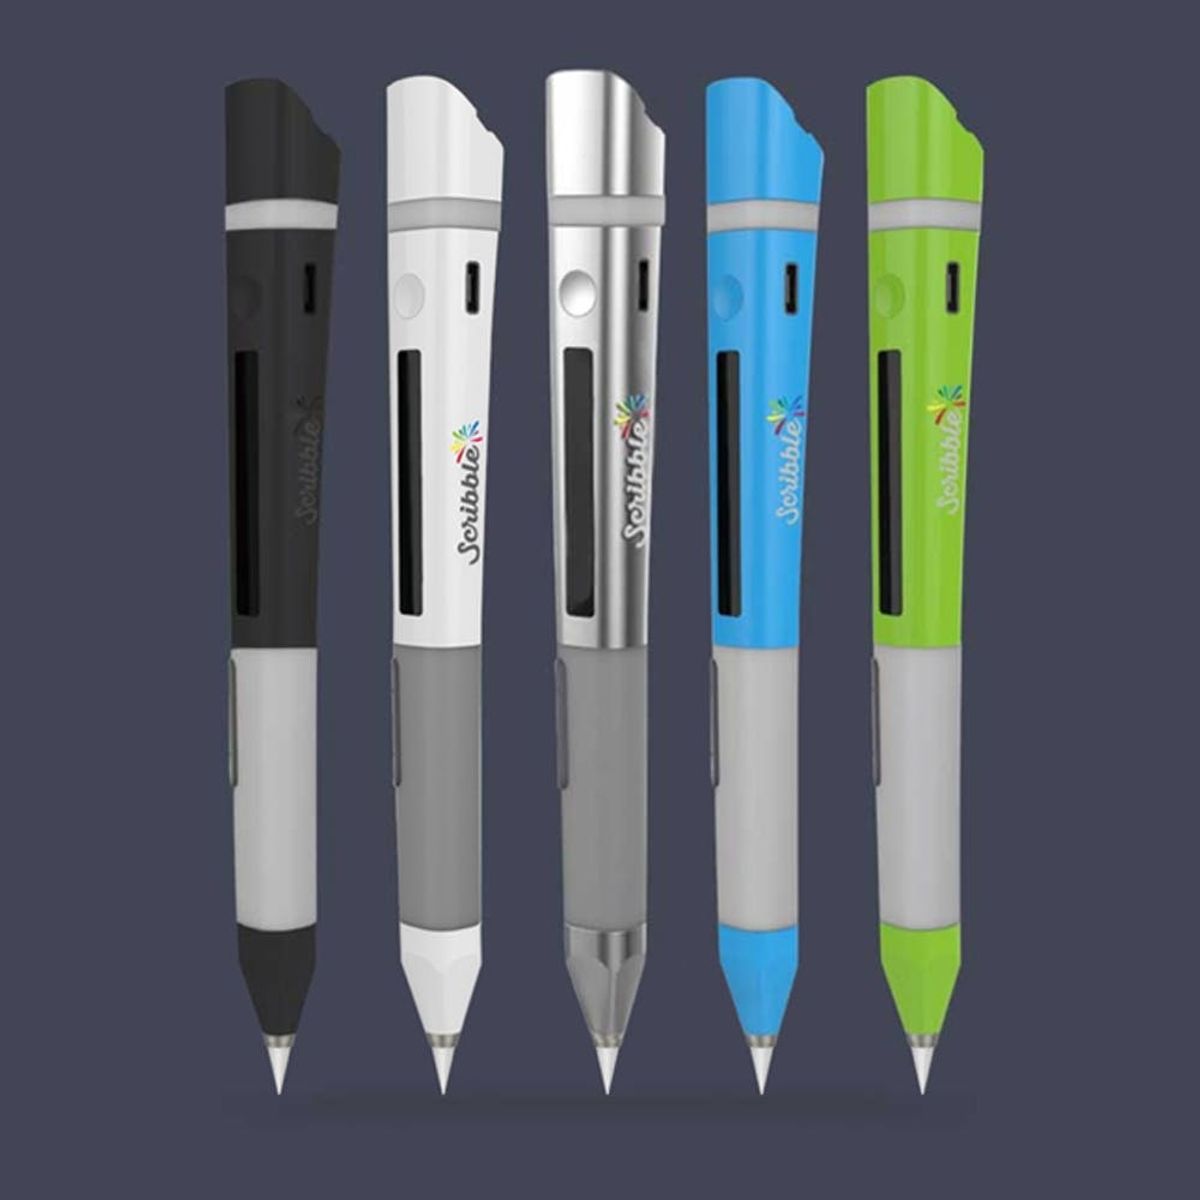 Here Is the Pen That Turns the World into Your Color Palette